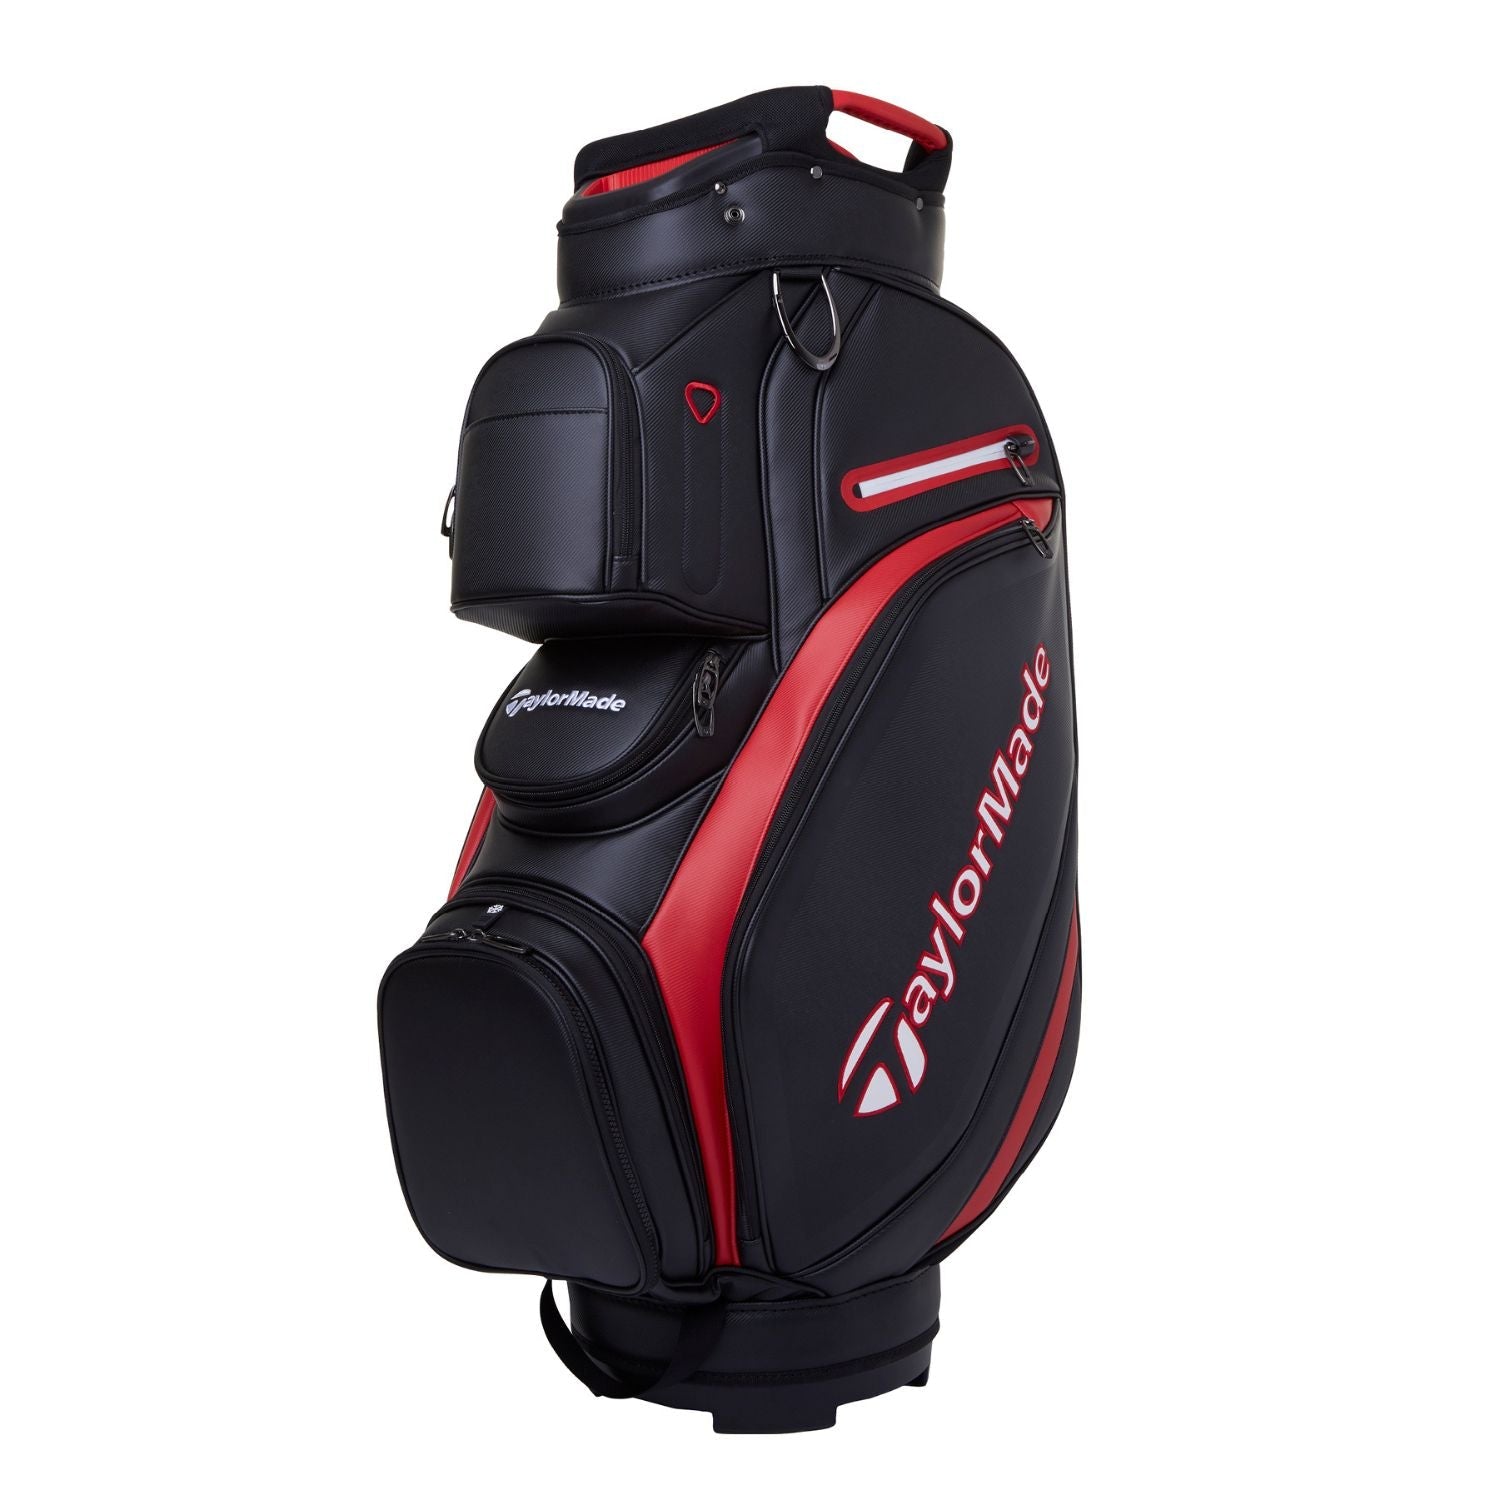 TaylorMade Deluxe Golf Cart Bag